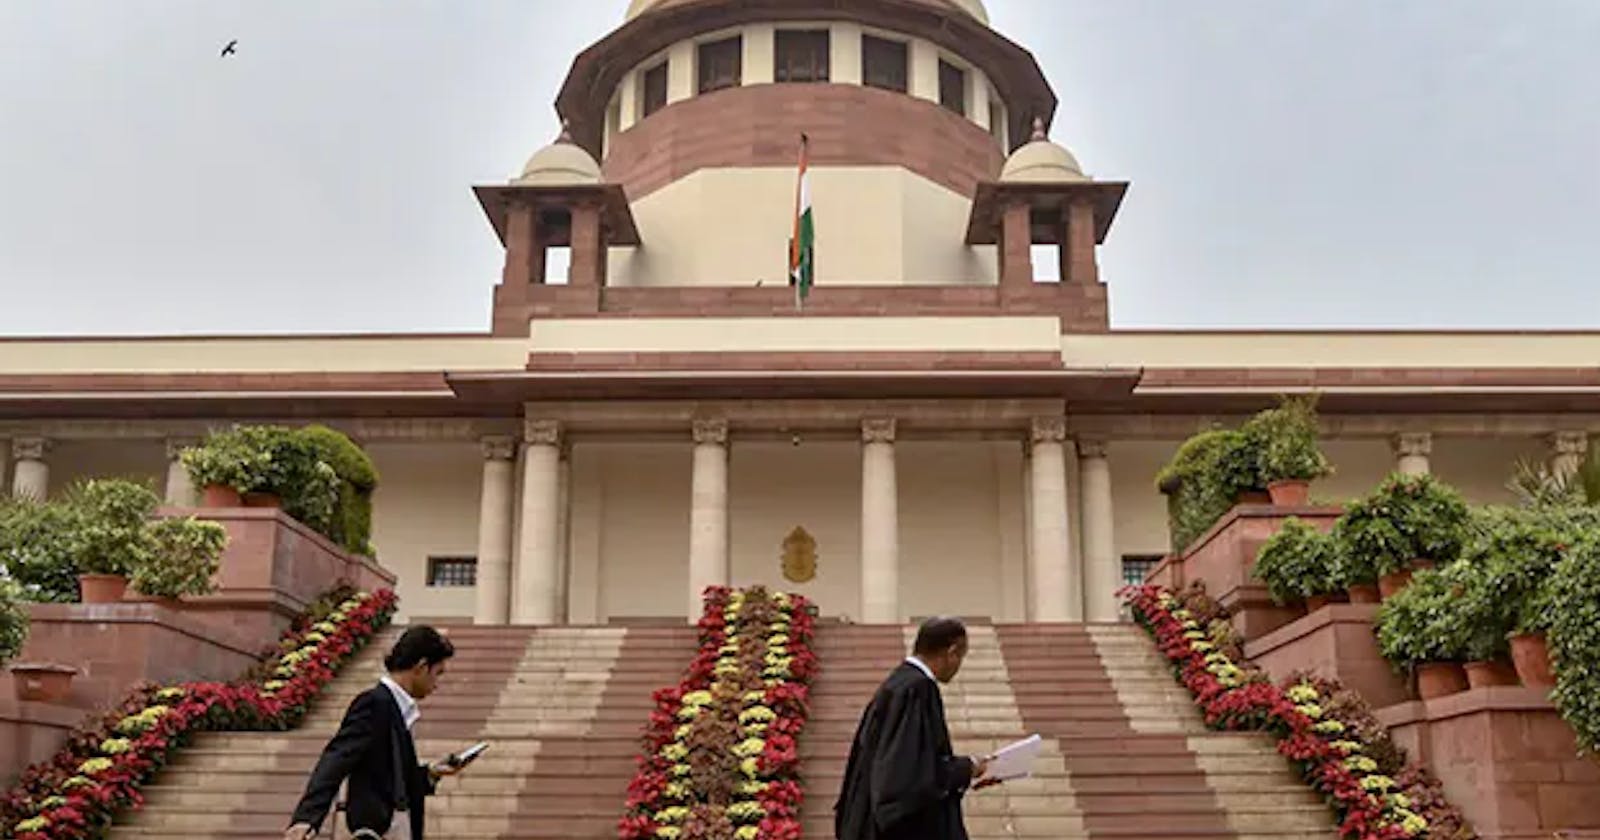 "Don't Make Us...": Supreme Court To Centre On Judges' Appointment Delays